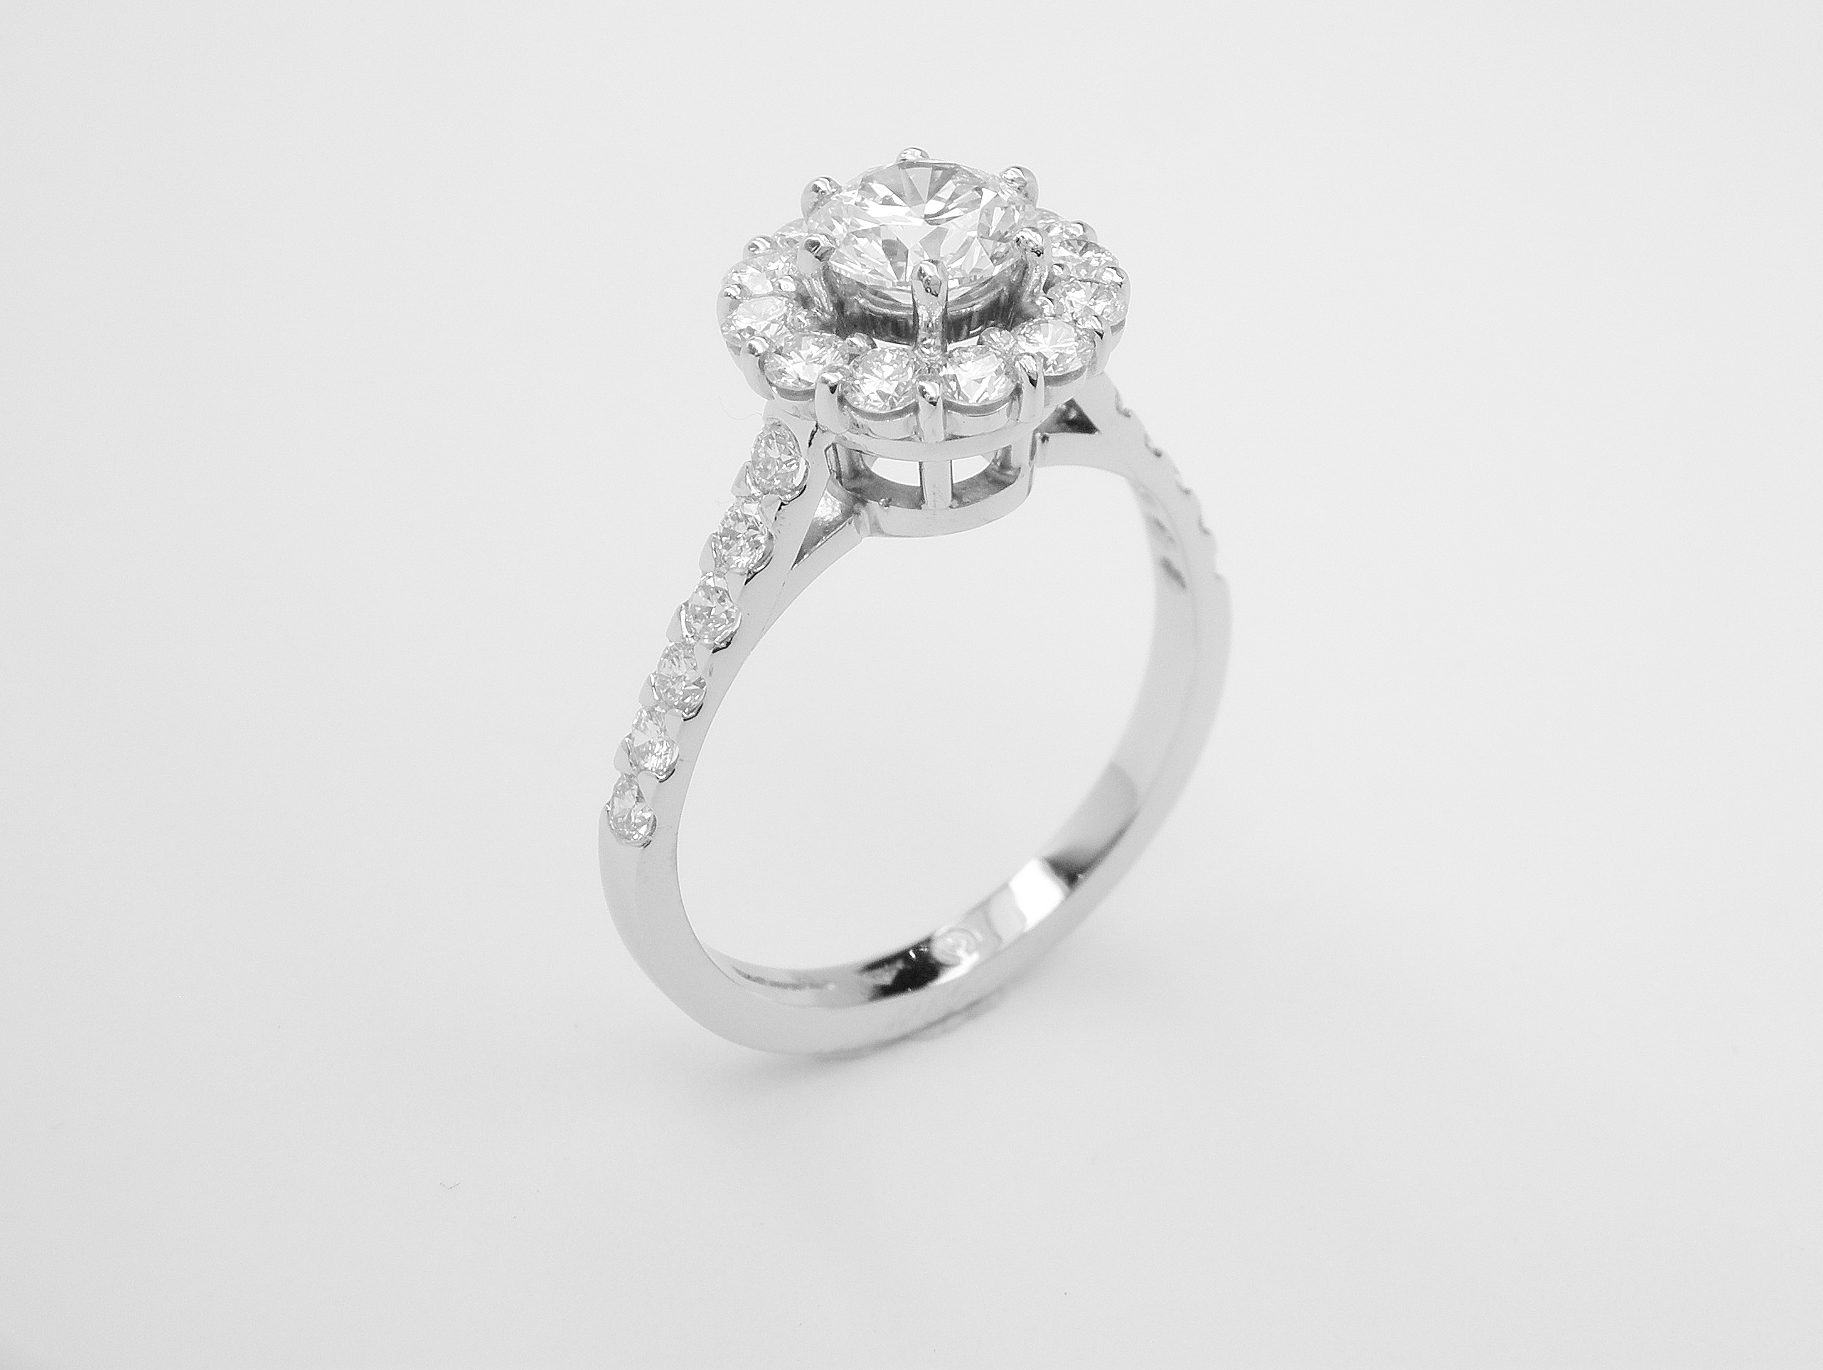 A halo cluster ring comprising of 13 round modern brilliant cut diamonds set in platinum with diamonds cut down set in the shoulders.